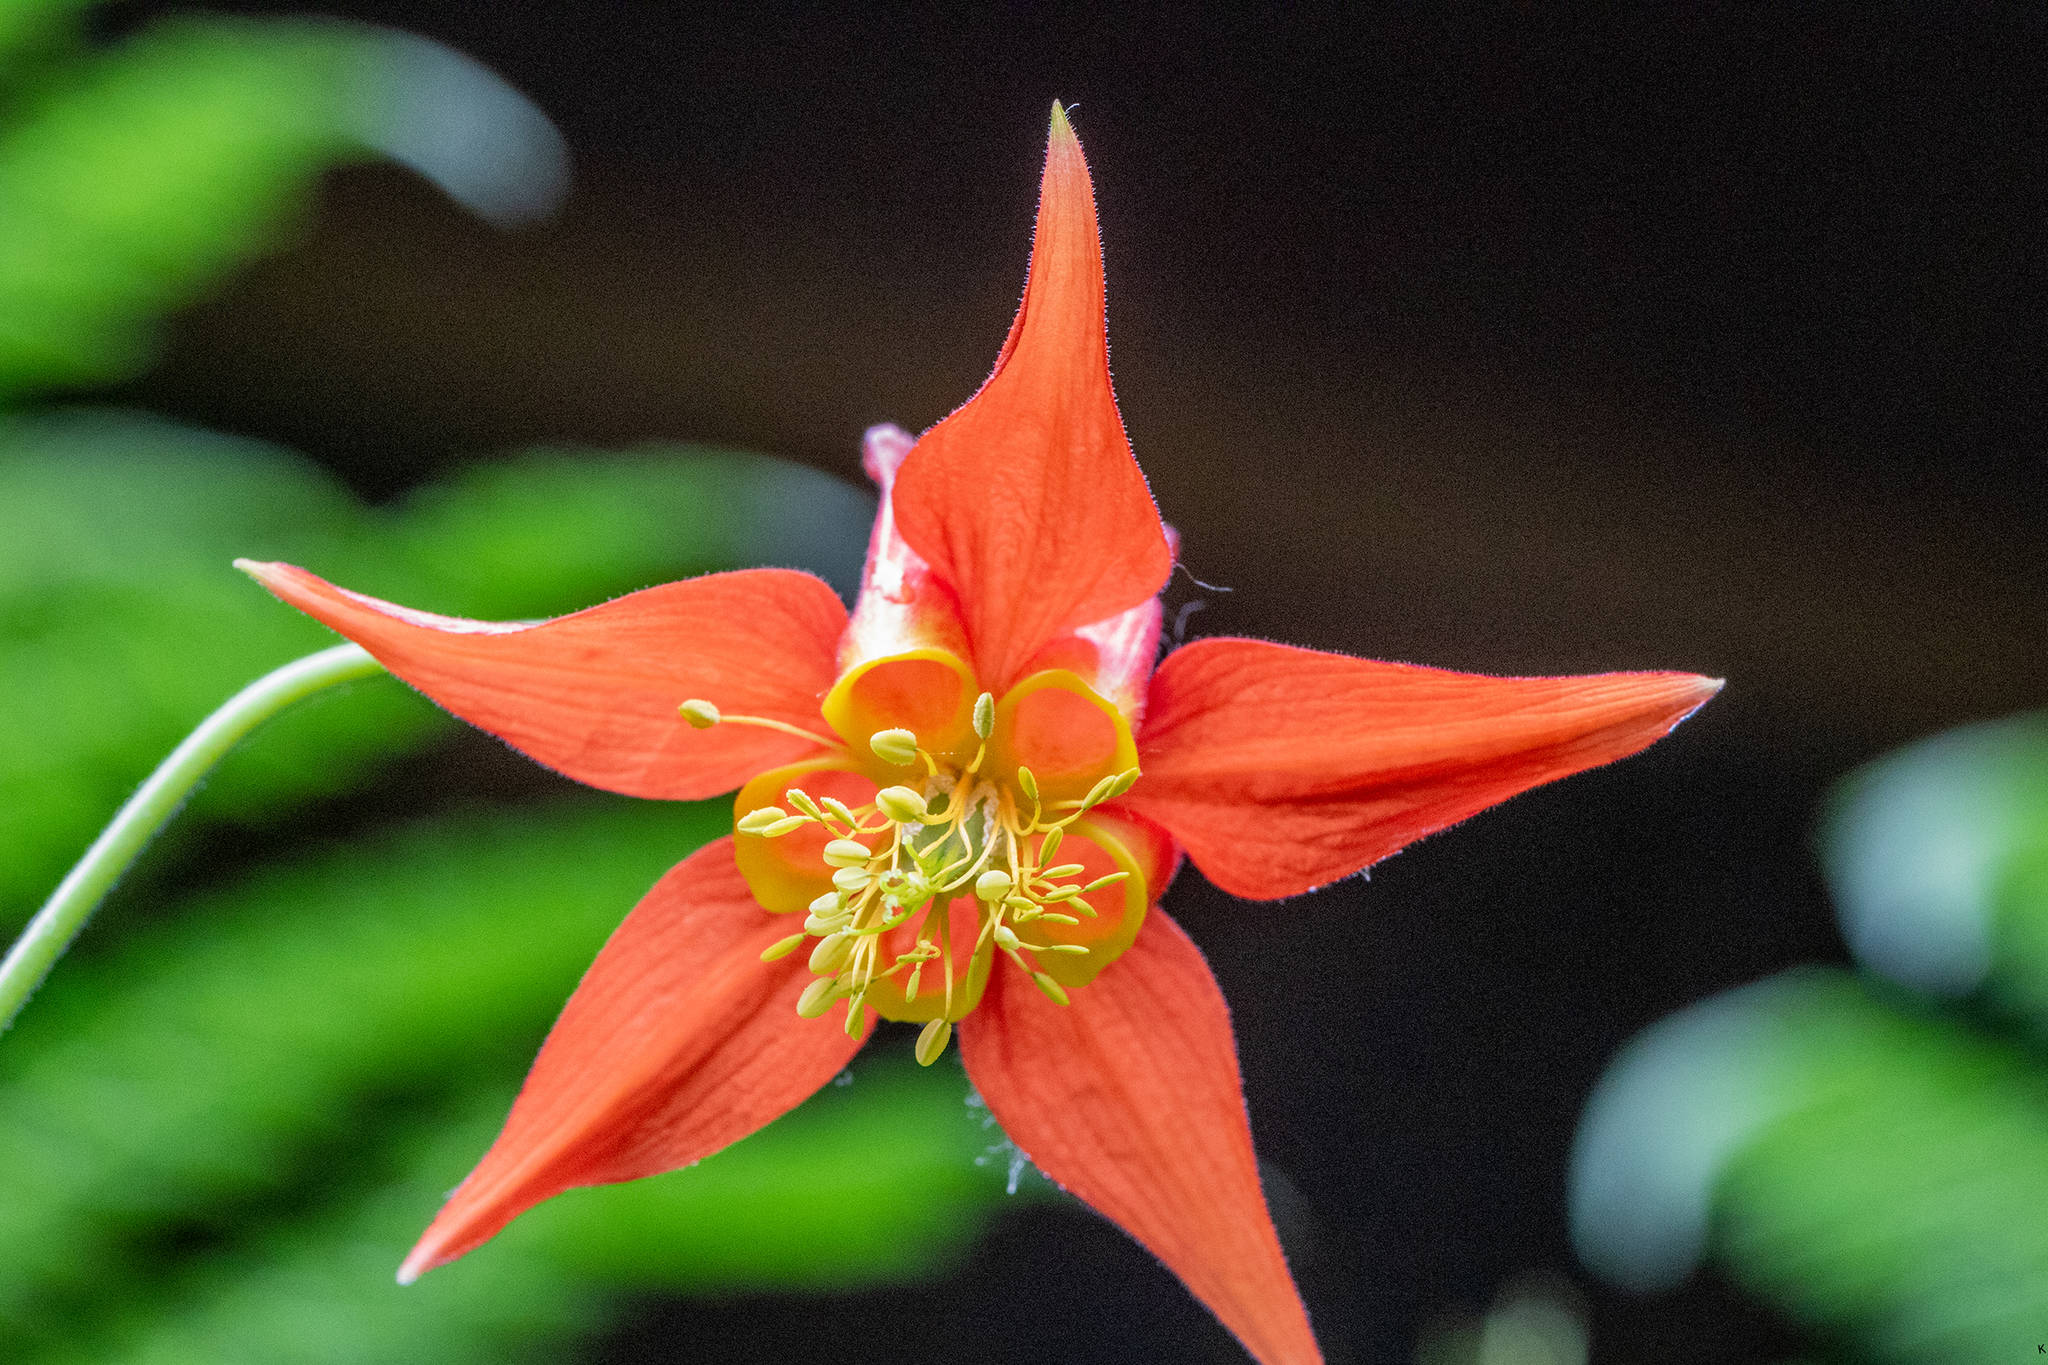 The view of a red columbine flower for an approaching pollinator: five spread-out red sepals and five yellow petals opening into reddish nectaries extended behind the flower. Male and female parts protrude in front of the openings and would be contacted as a pollinator probes for nectar. (Courtesy Photo / Kerry Howard)